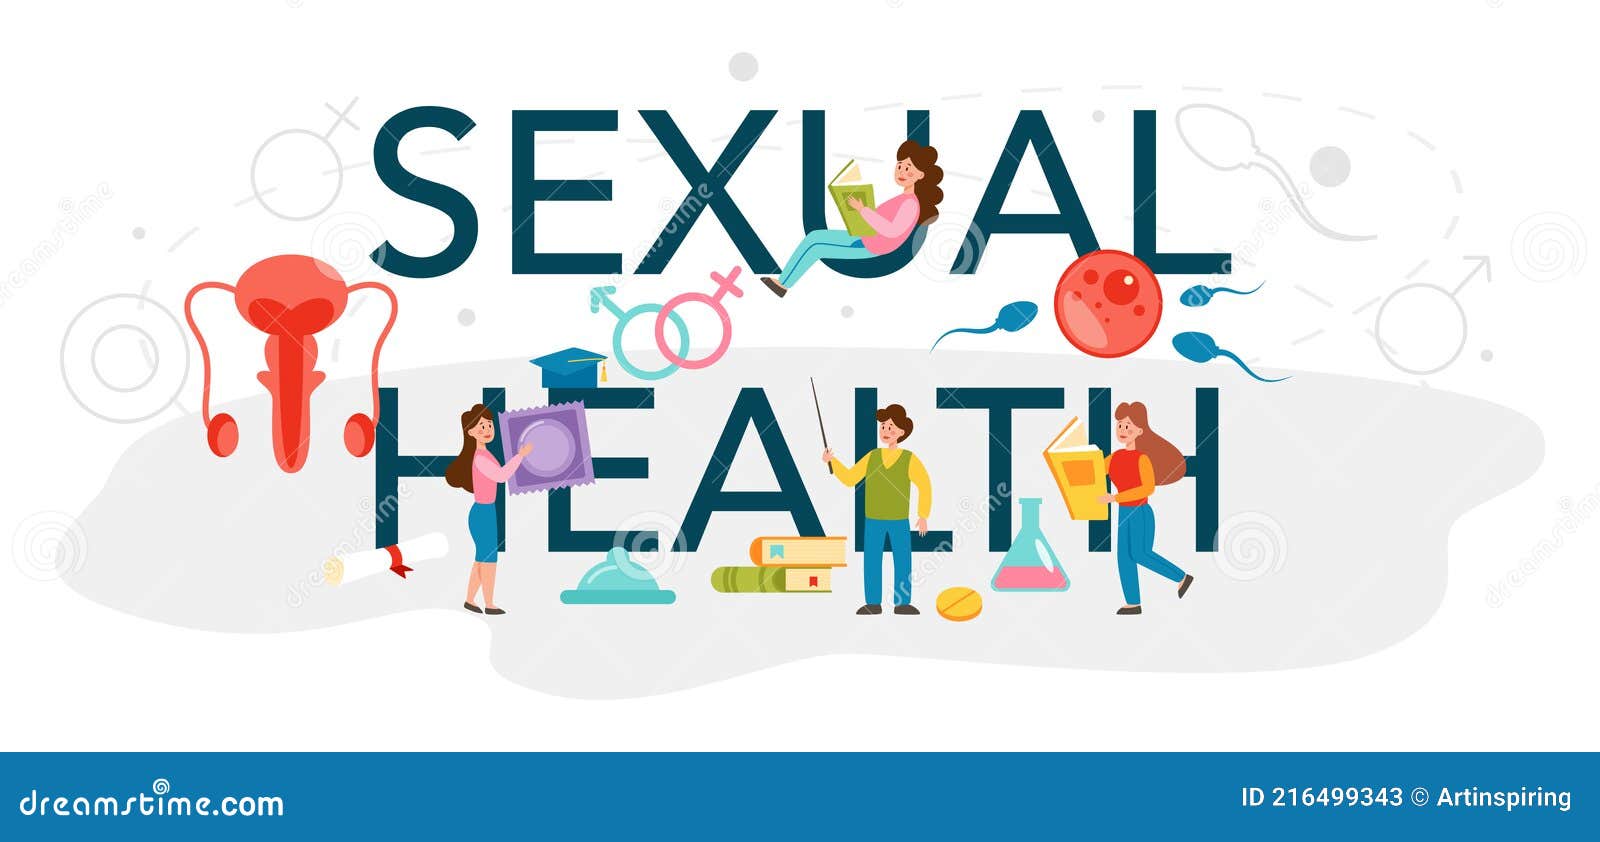 Sexual Health Typographic Header Sexual Health Lesson For Young People 